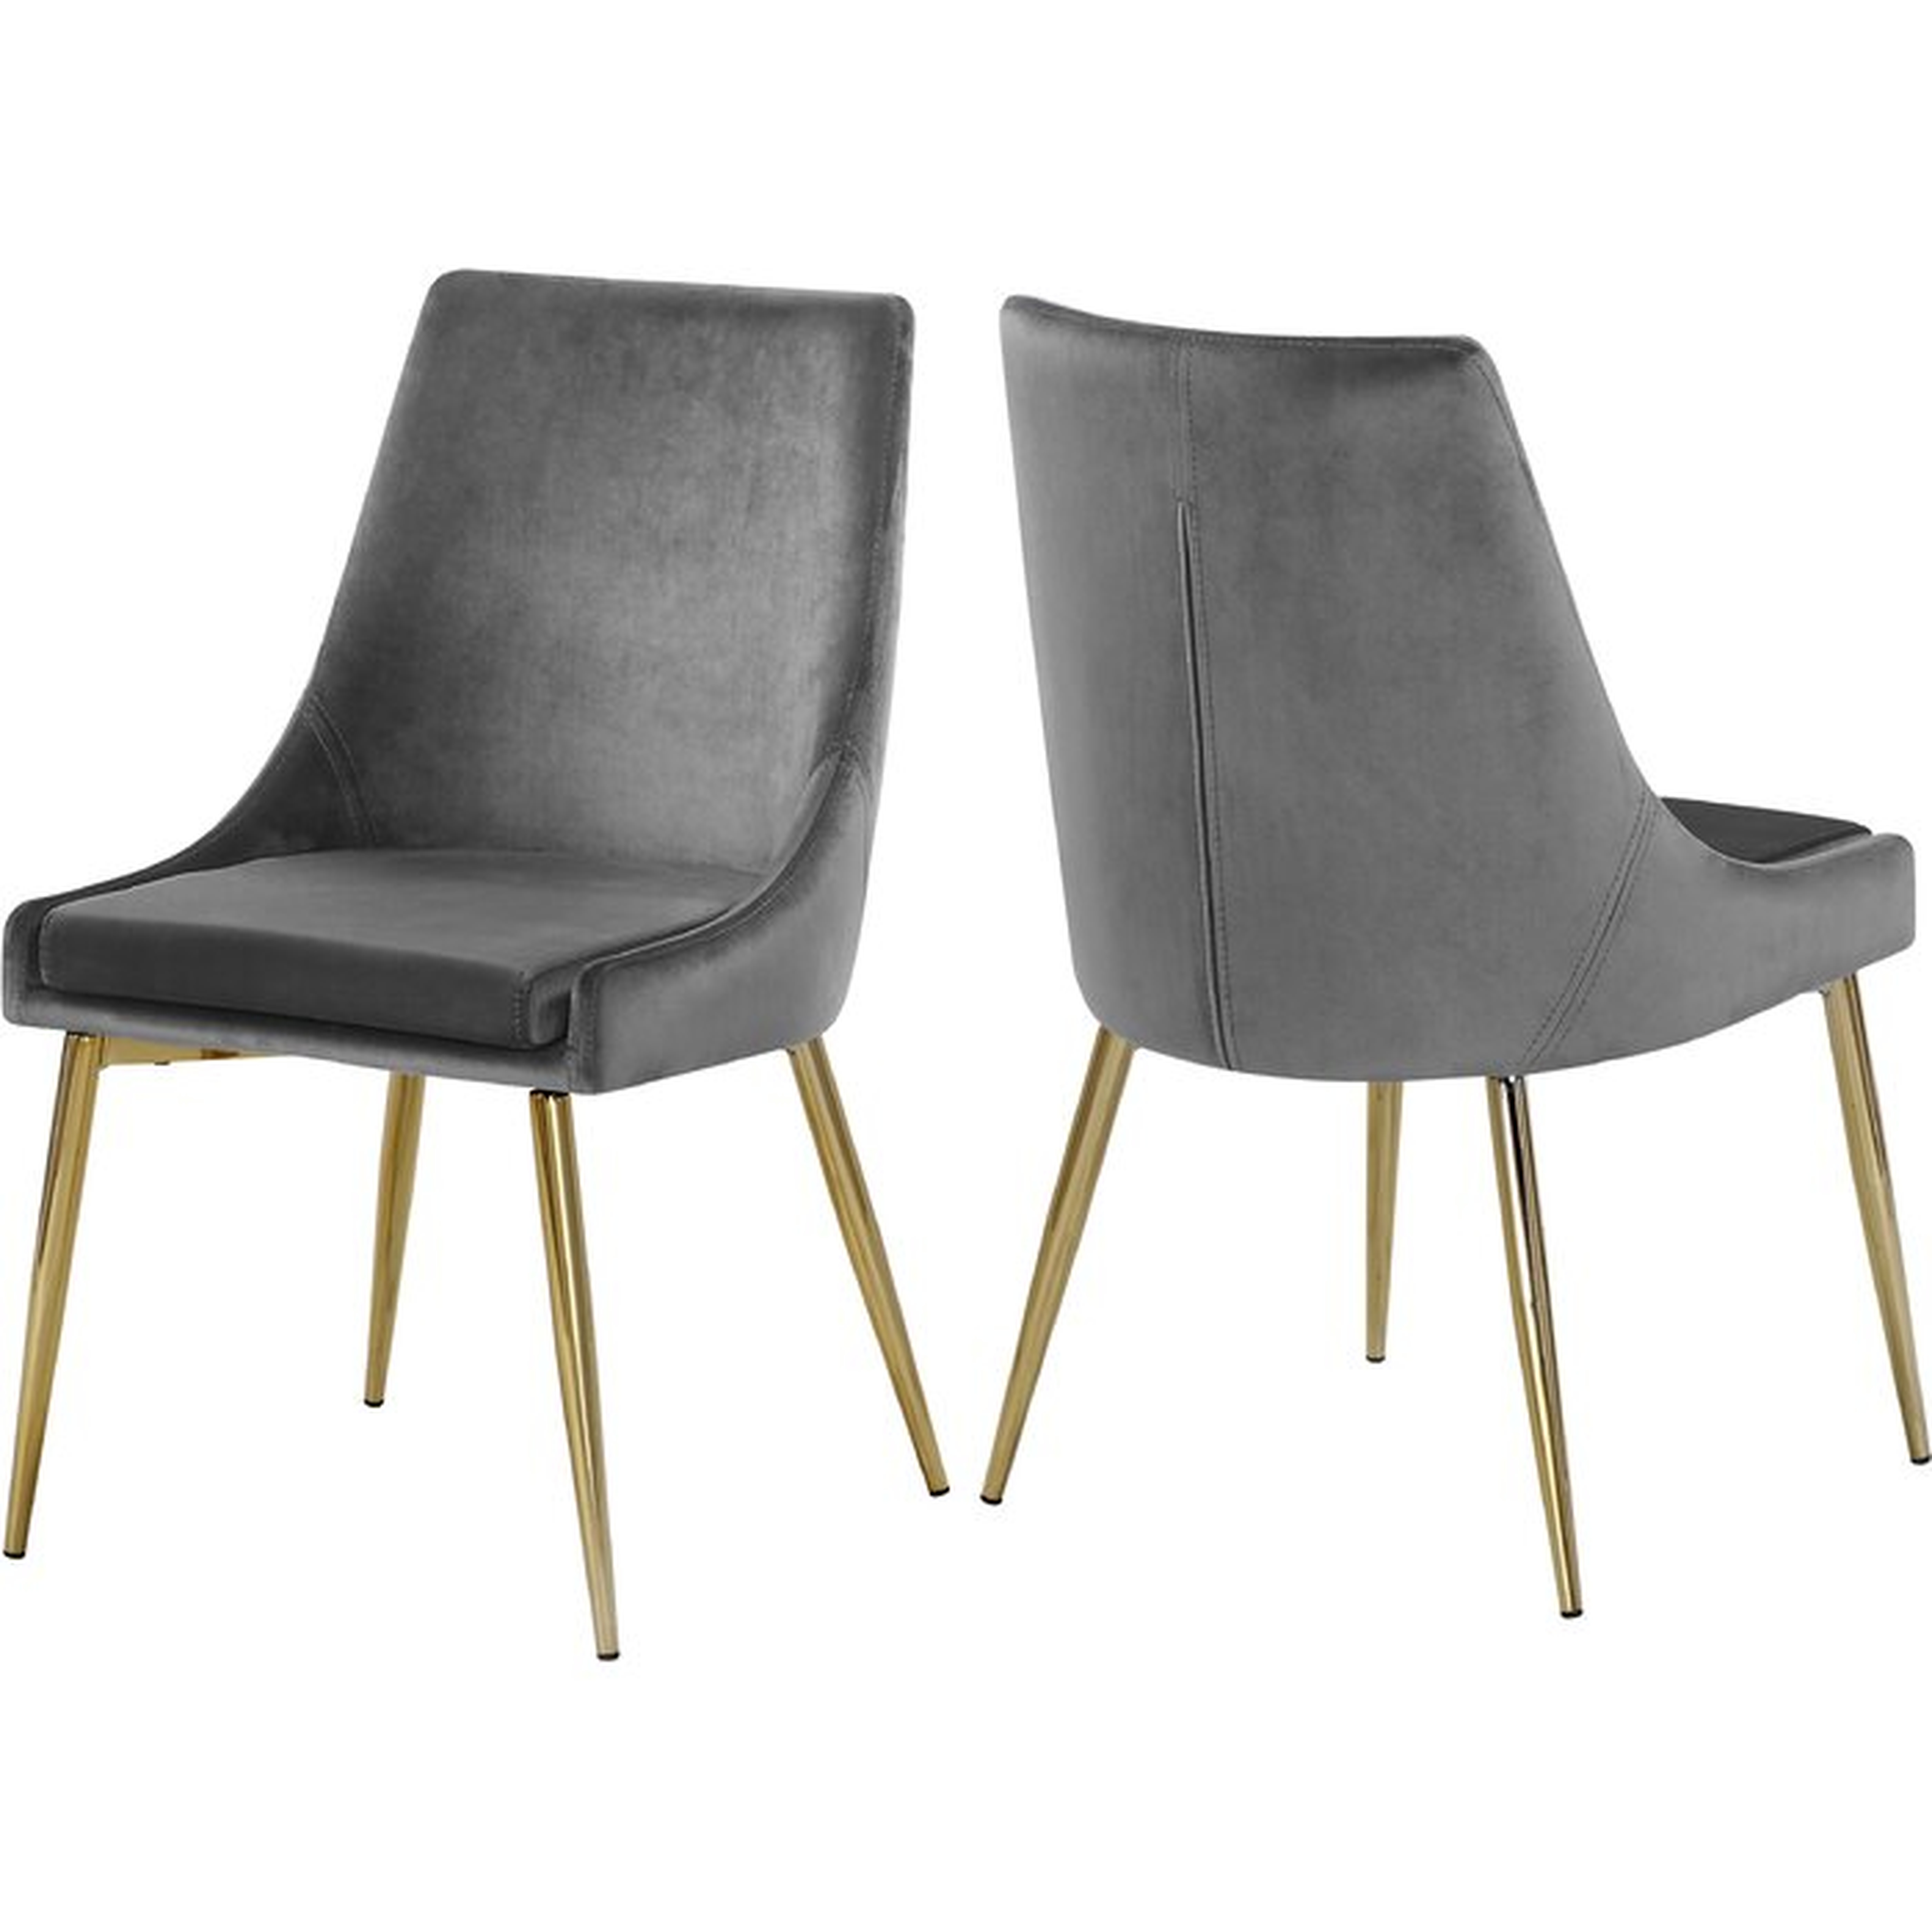 Karina Upholstered Dining Chair, Gray, Gold legs (set of two) - Wayfair